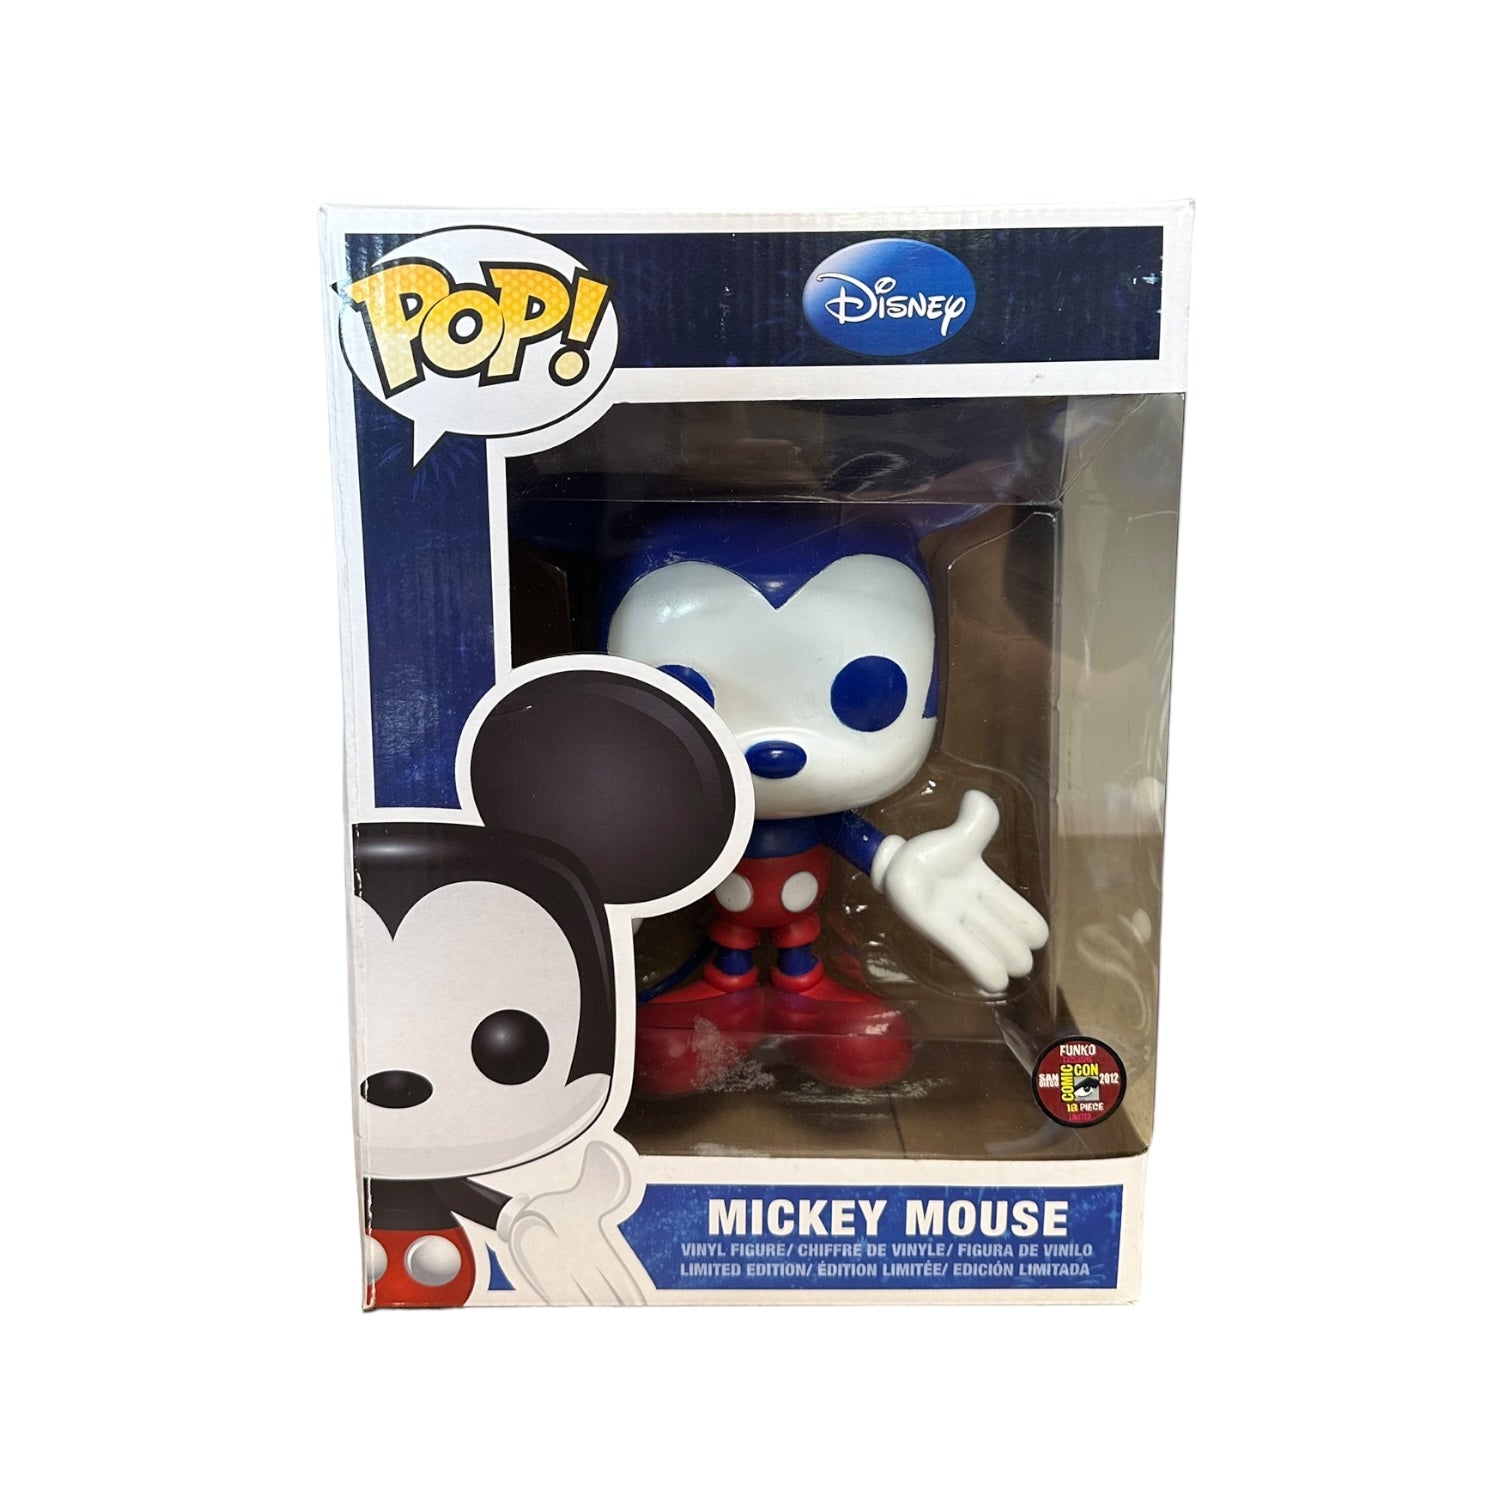 Mickey Mouse (Blue & Red) 9" Funko Pop! - Disney - SDCC 2012 Exclusive LE18 Pcs - Condition 5.5/10